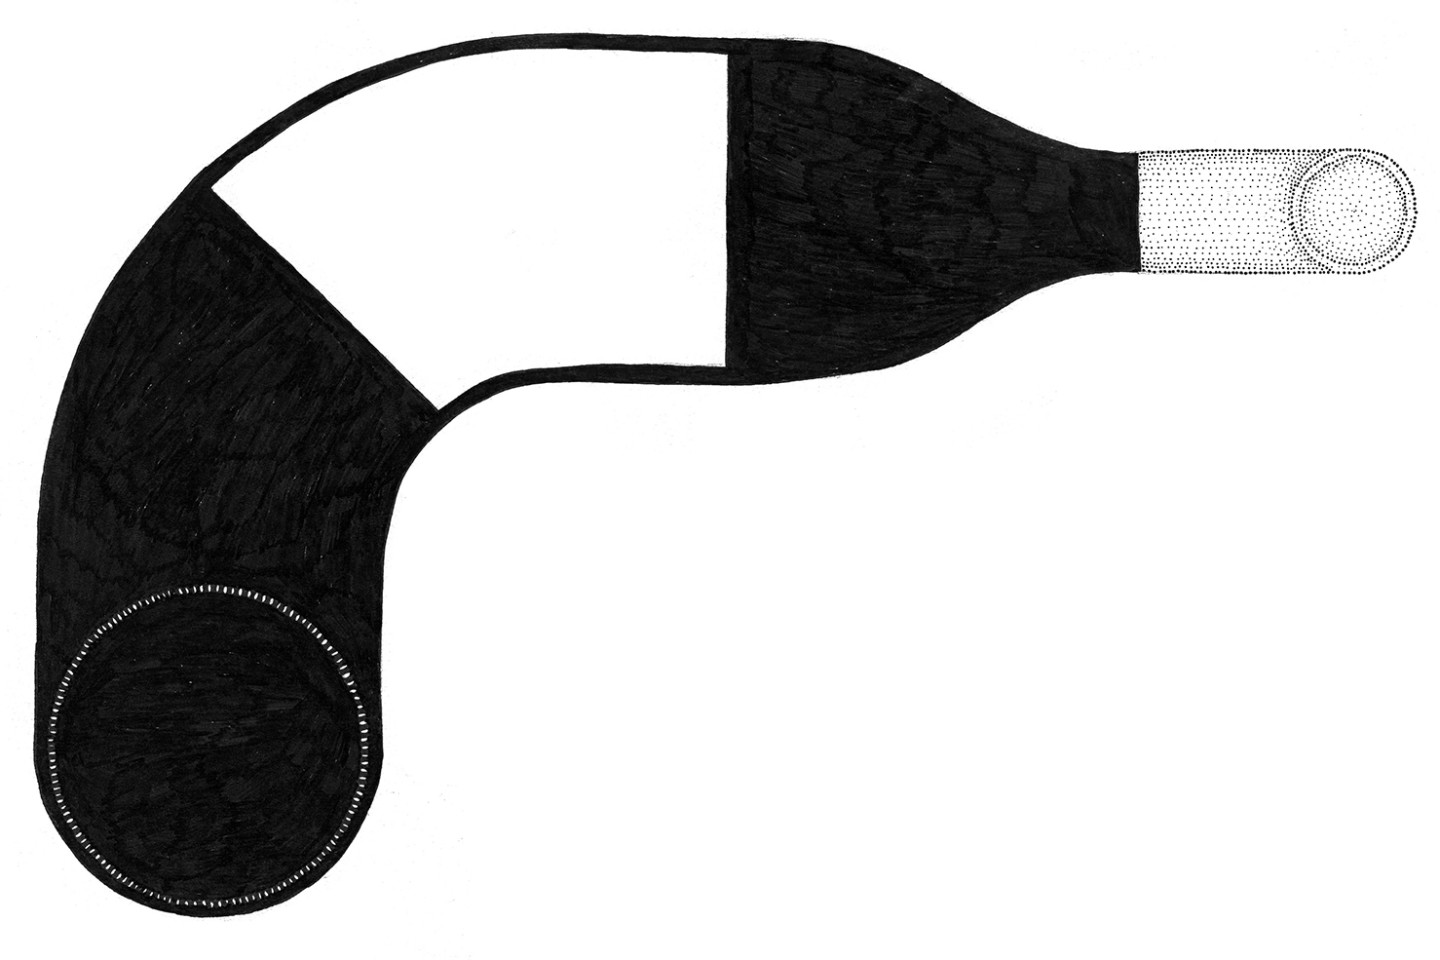 Drawing of a wine bottle in black and white.